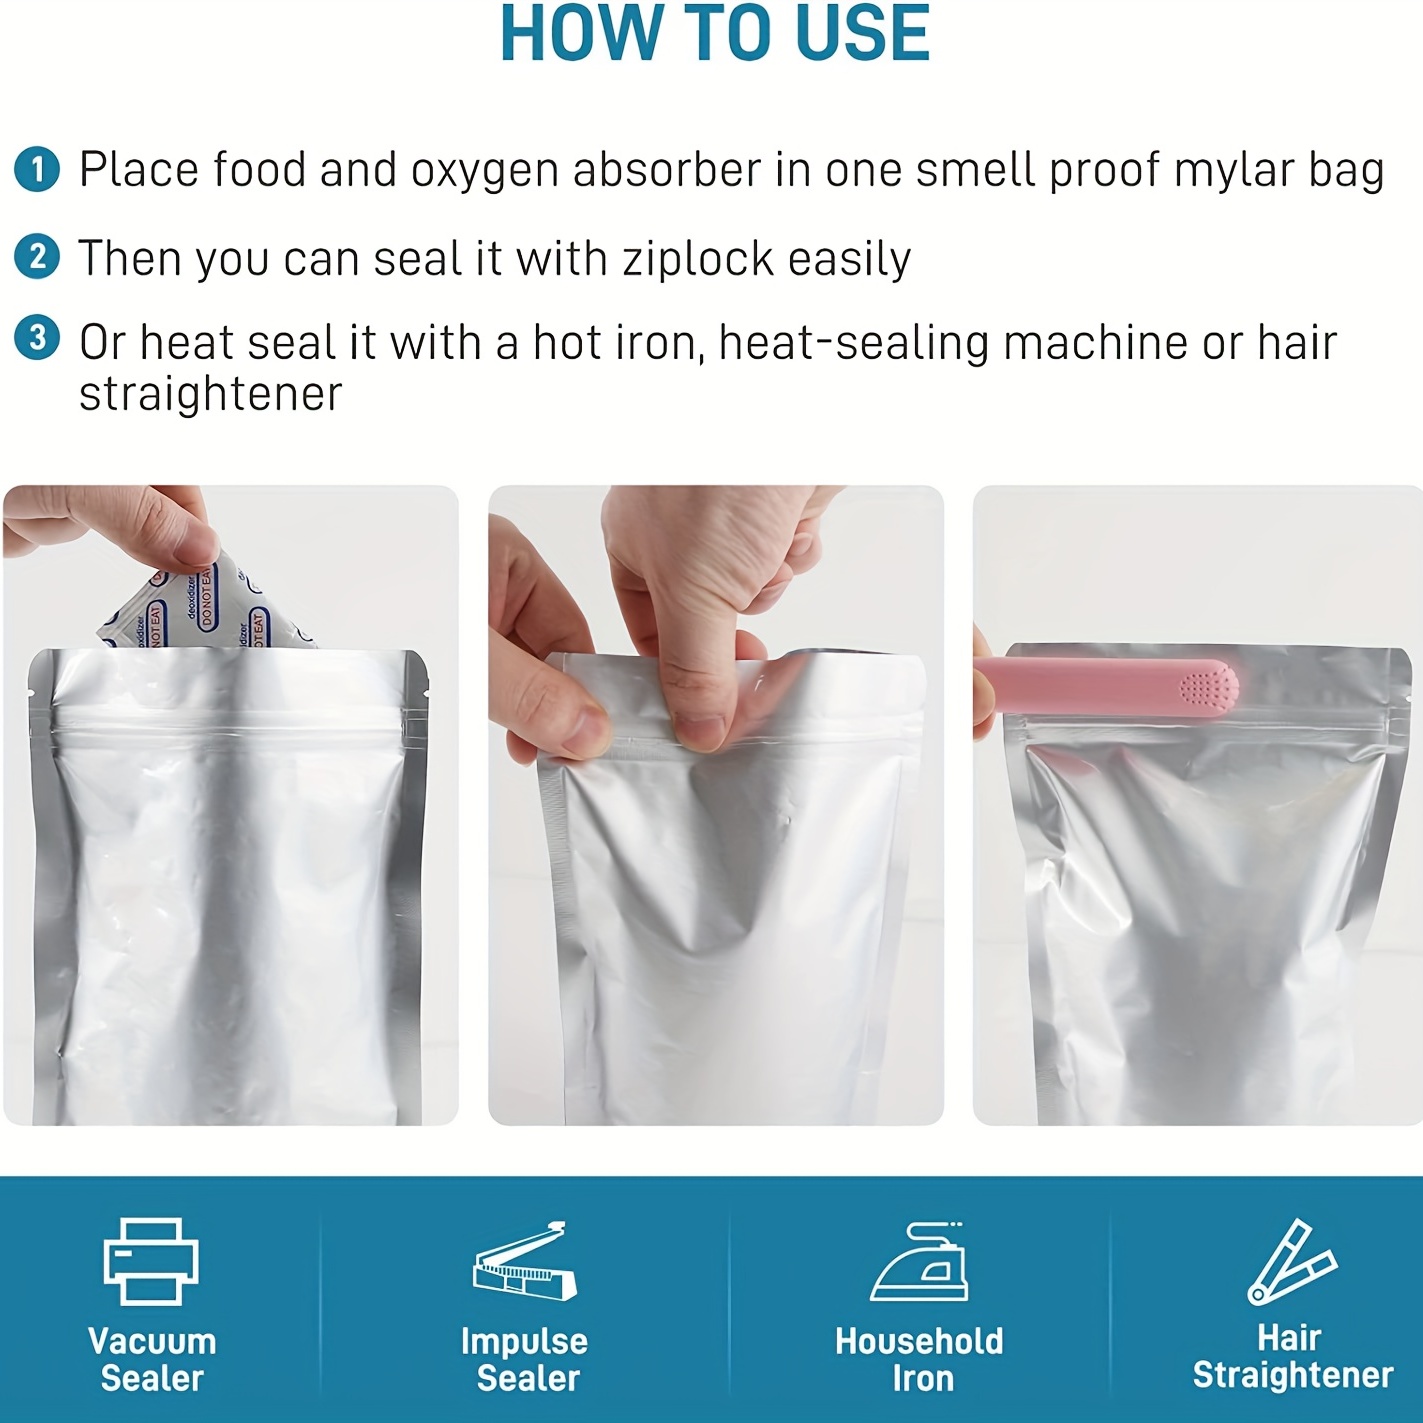 5 Gallon Mylar Food Storage Bags With Ziplock And Oxygen Absorbers